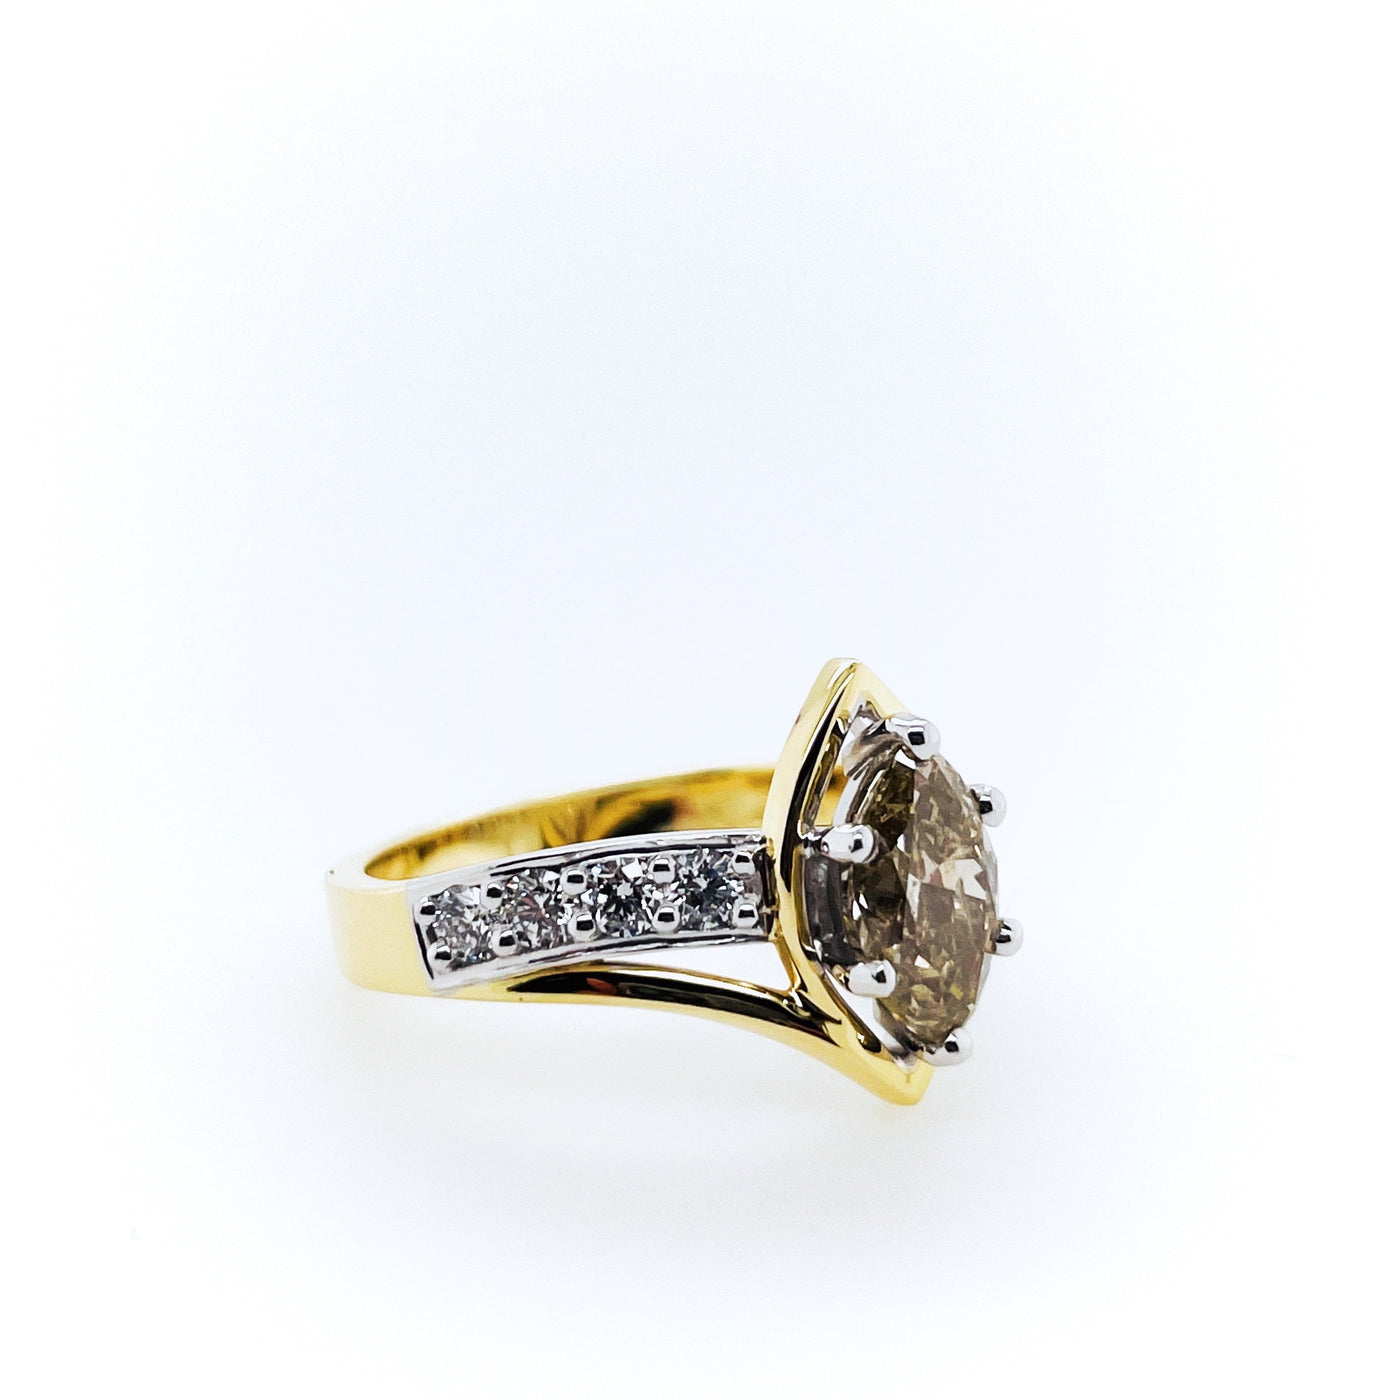 1.28ct Marquise Cut Champagne Diamond Ring- SOLD OUT